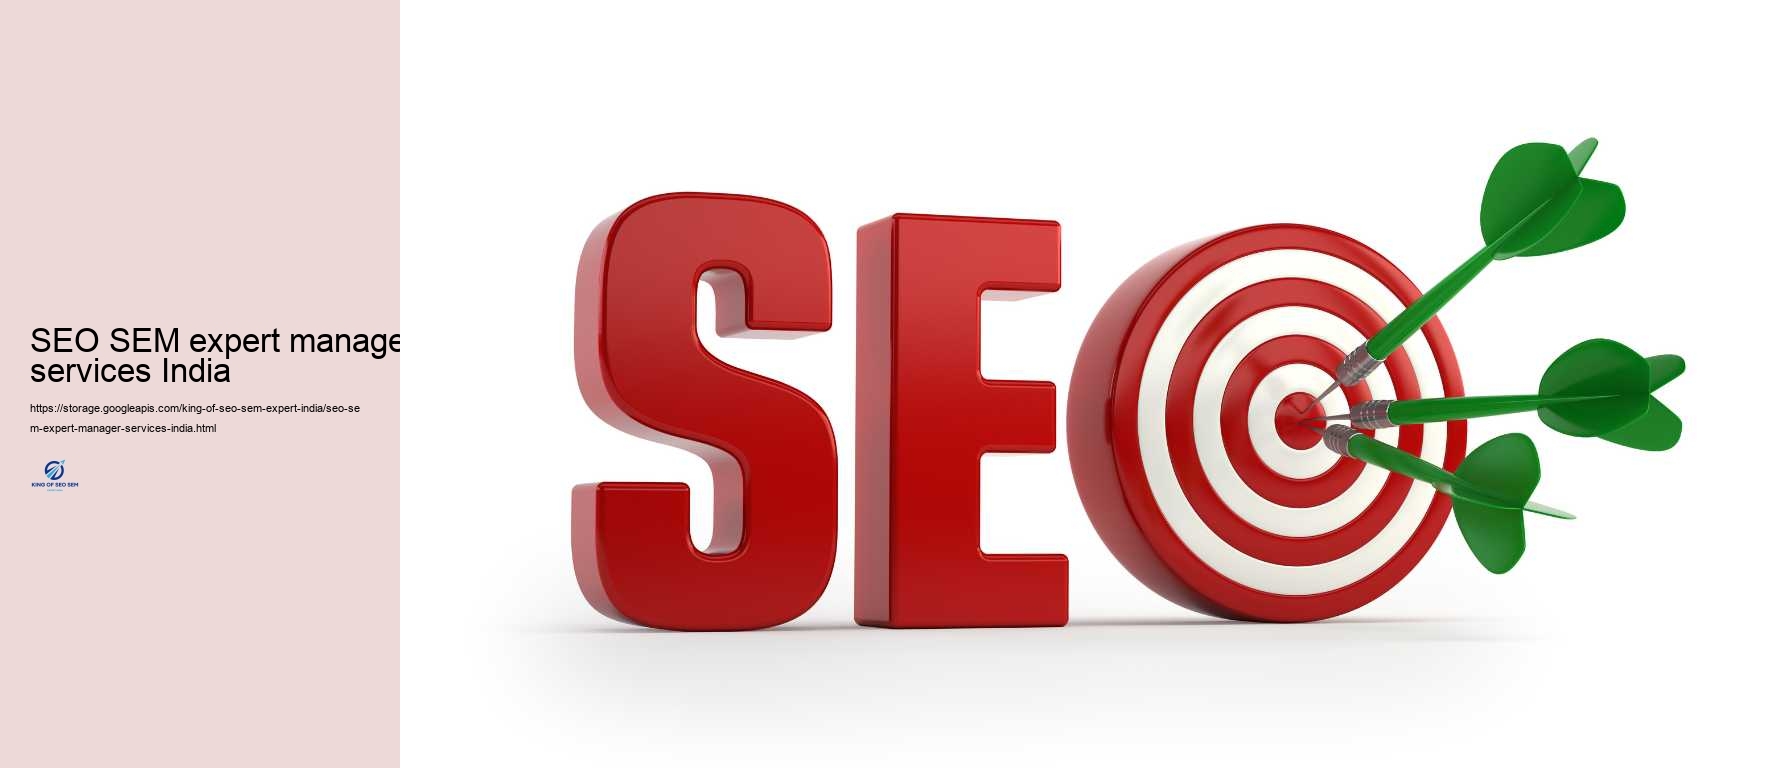 SEO SEM expert manager services India